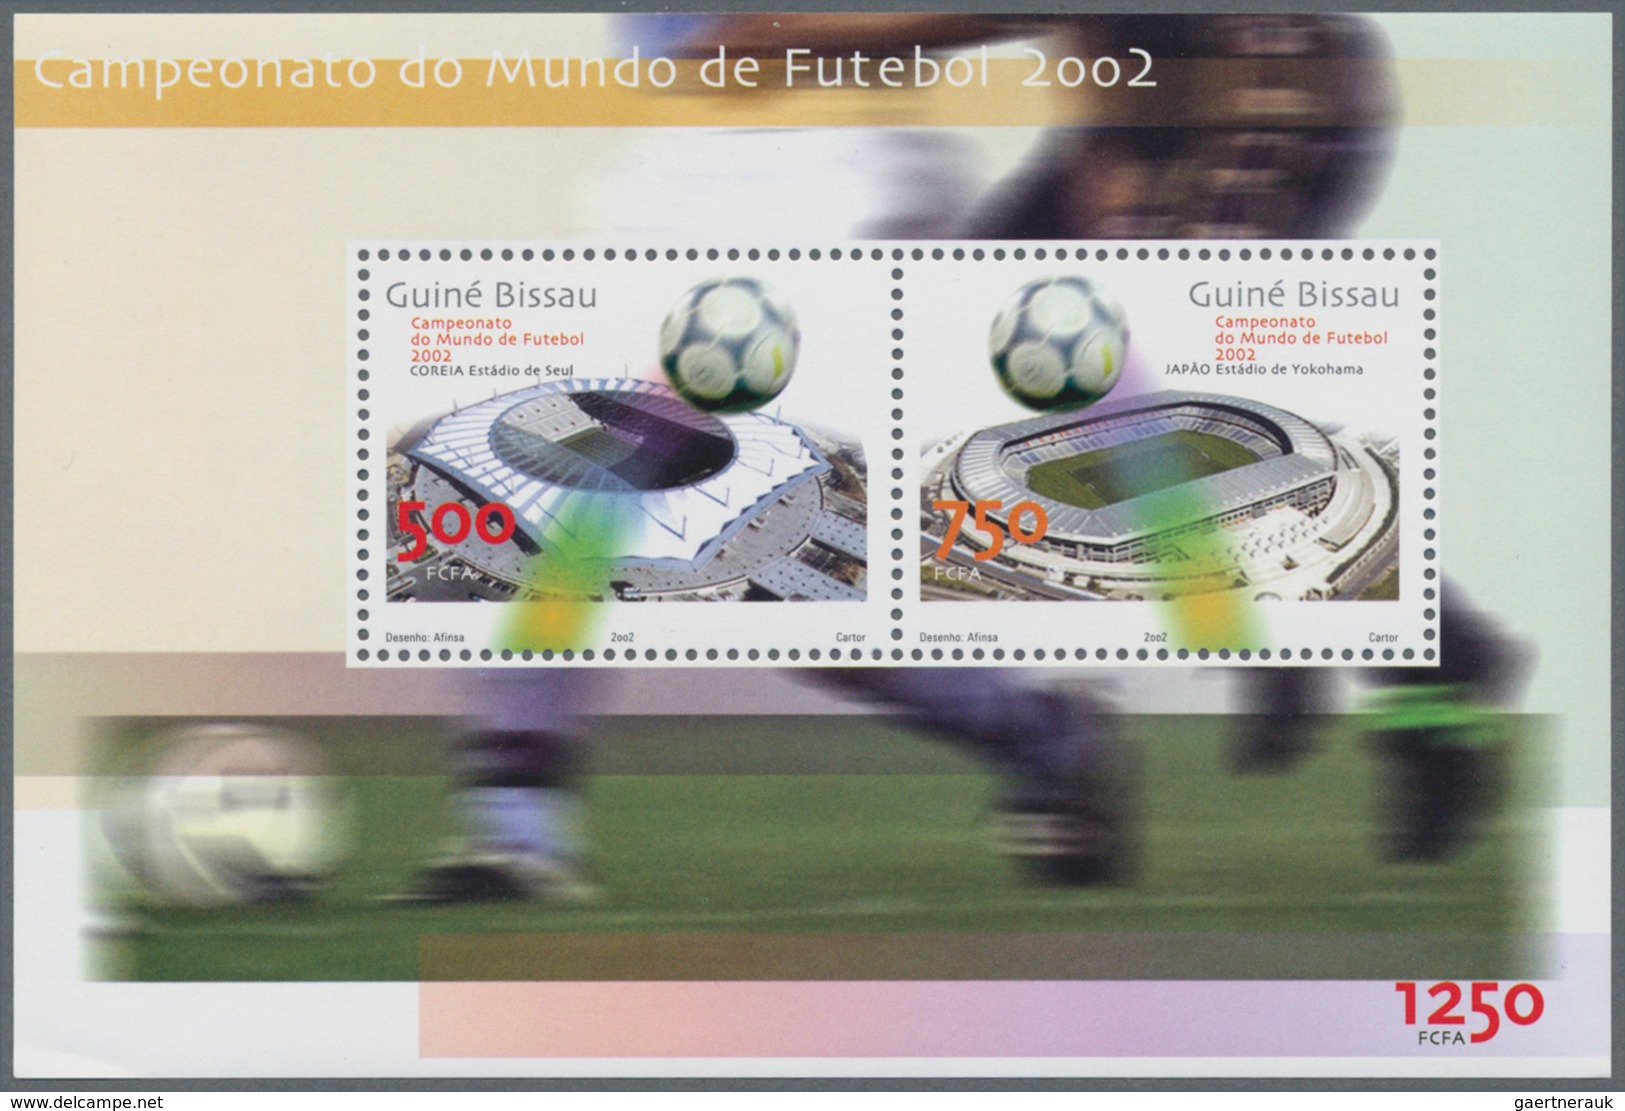 Guinea-Bissau: 2002, WORLD CUP, Souvenir Sheet, Investment Lot Of 500 Copies Mint Never Hinged (Mi.n - Guinea-Bissau